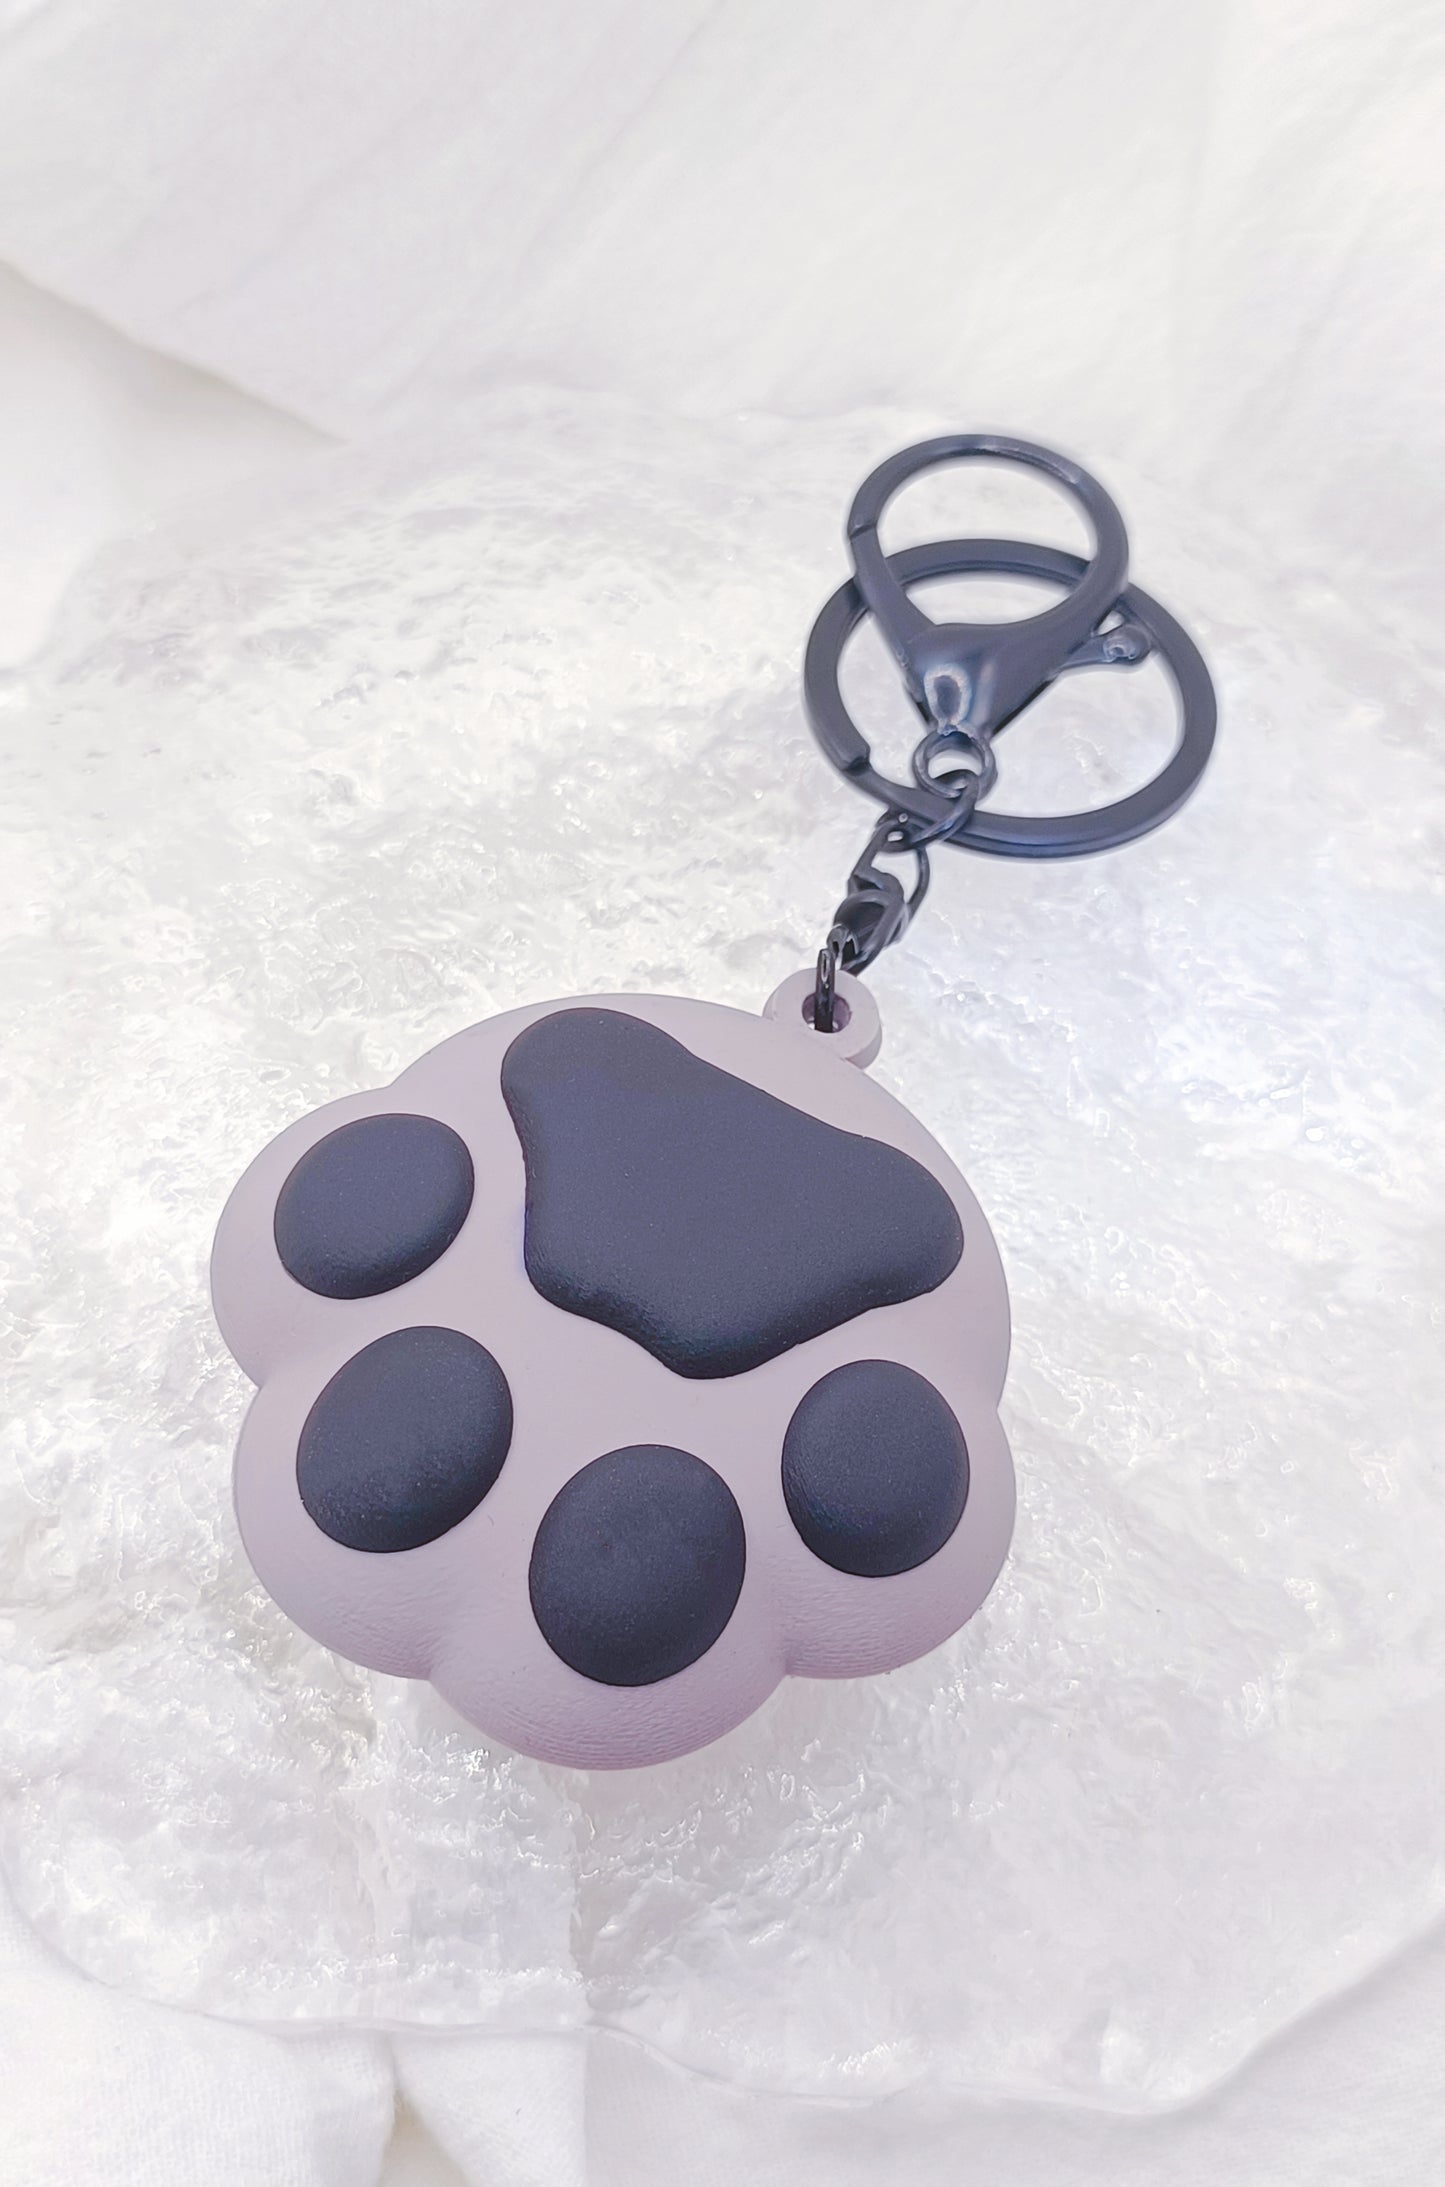 【Luxcellent x CreaMint】LAFS (Love at First Sight) KeyChain